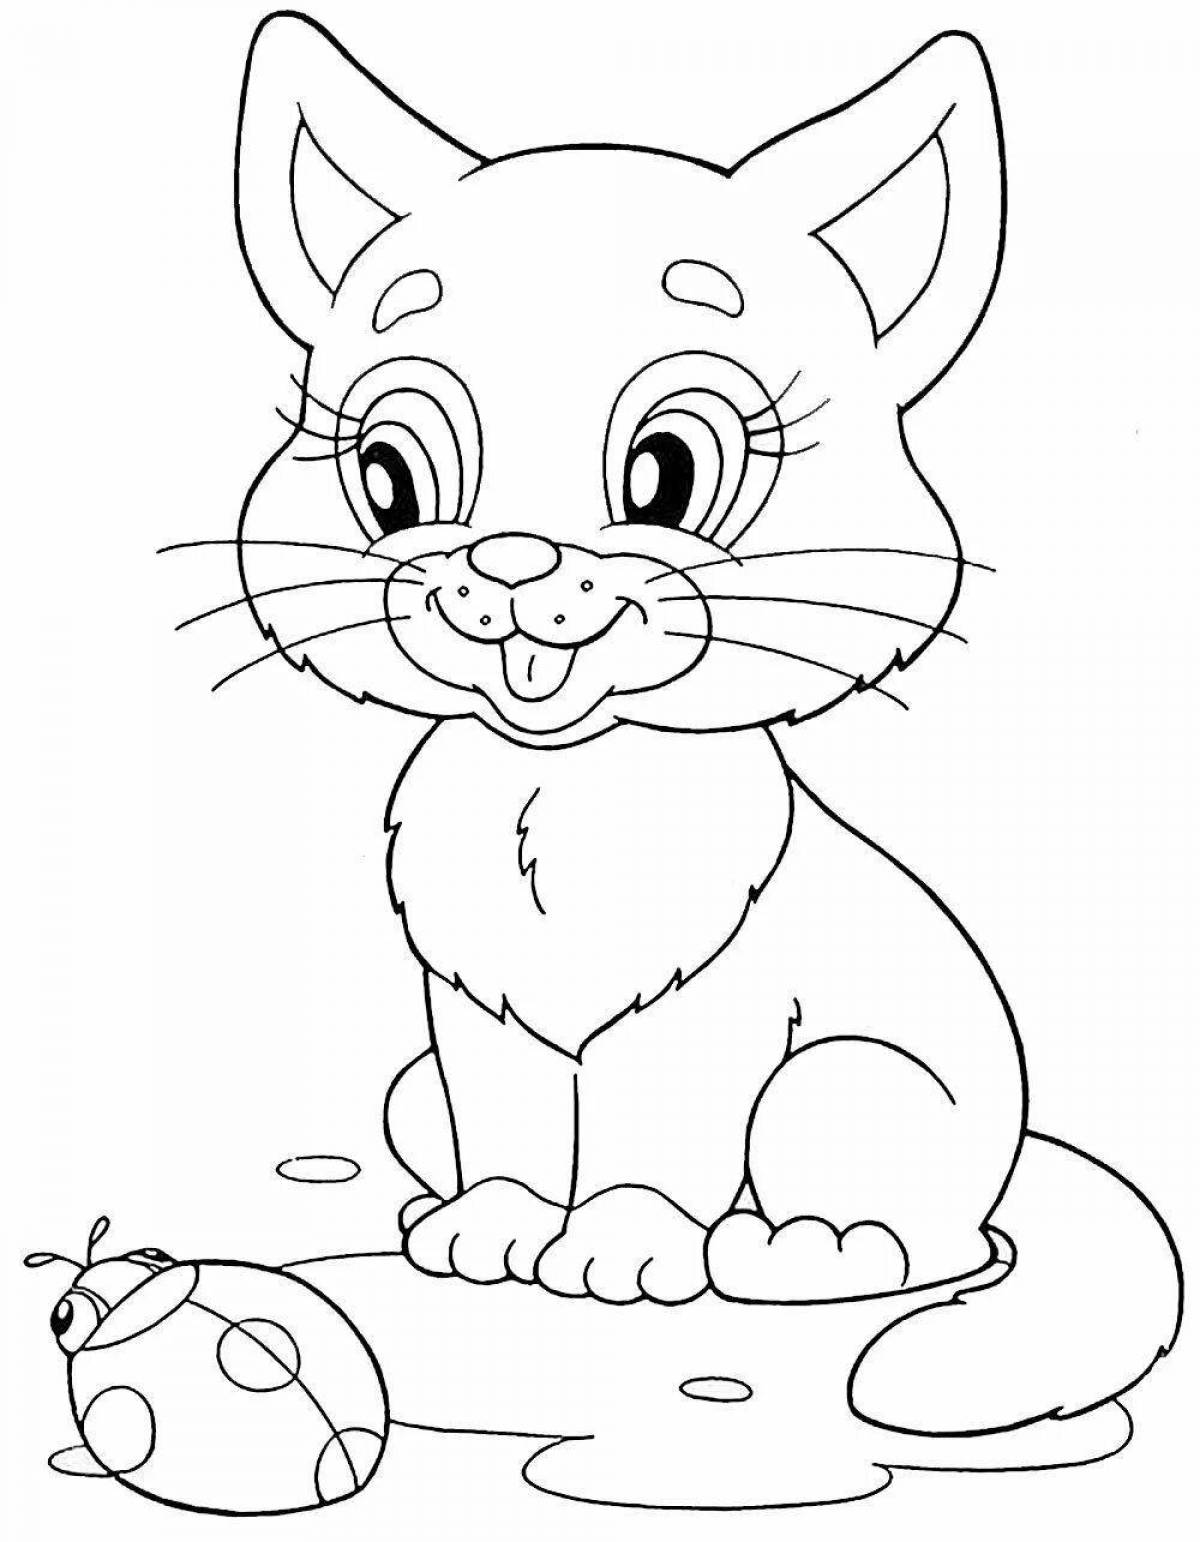 Creative coloring pages for kids 4 5